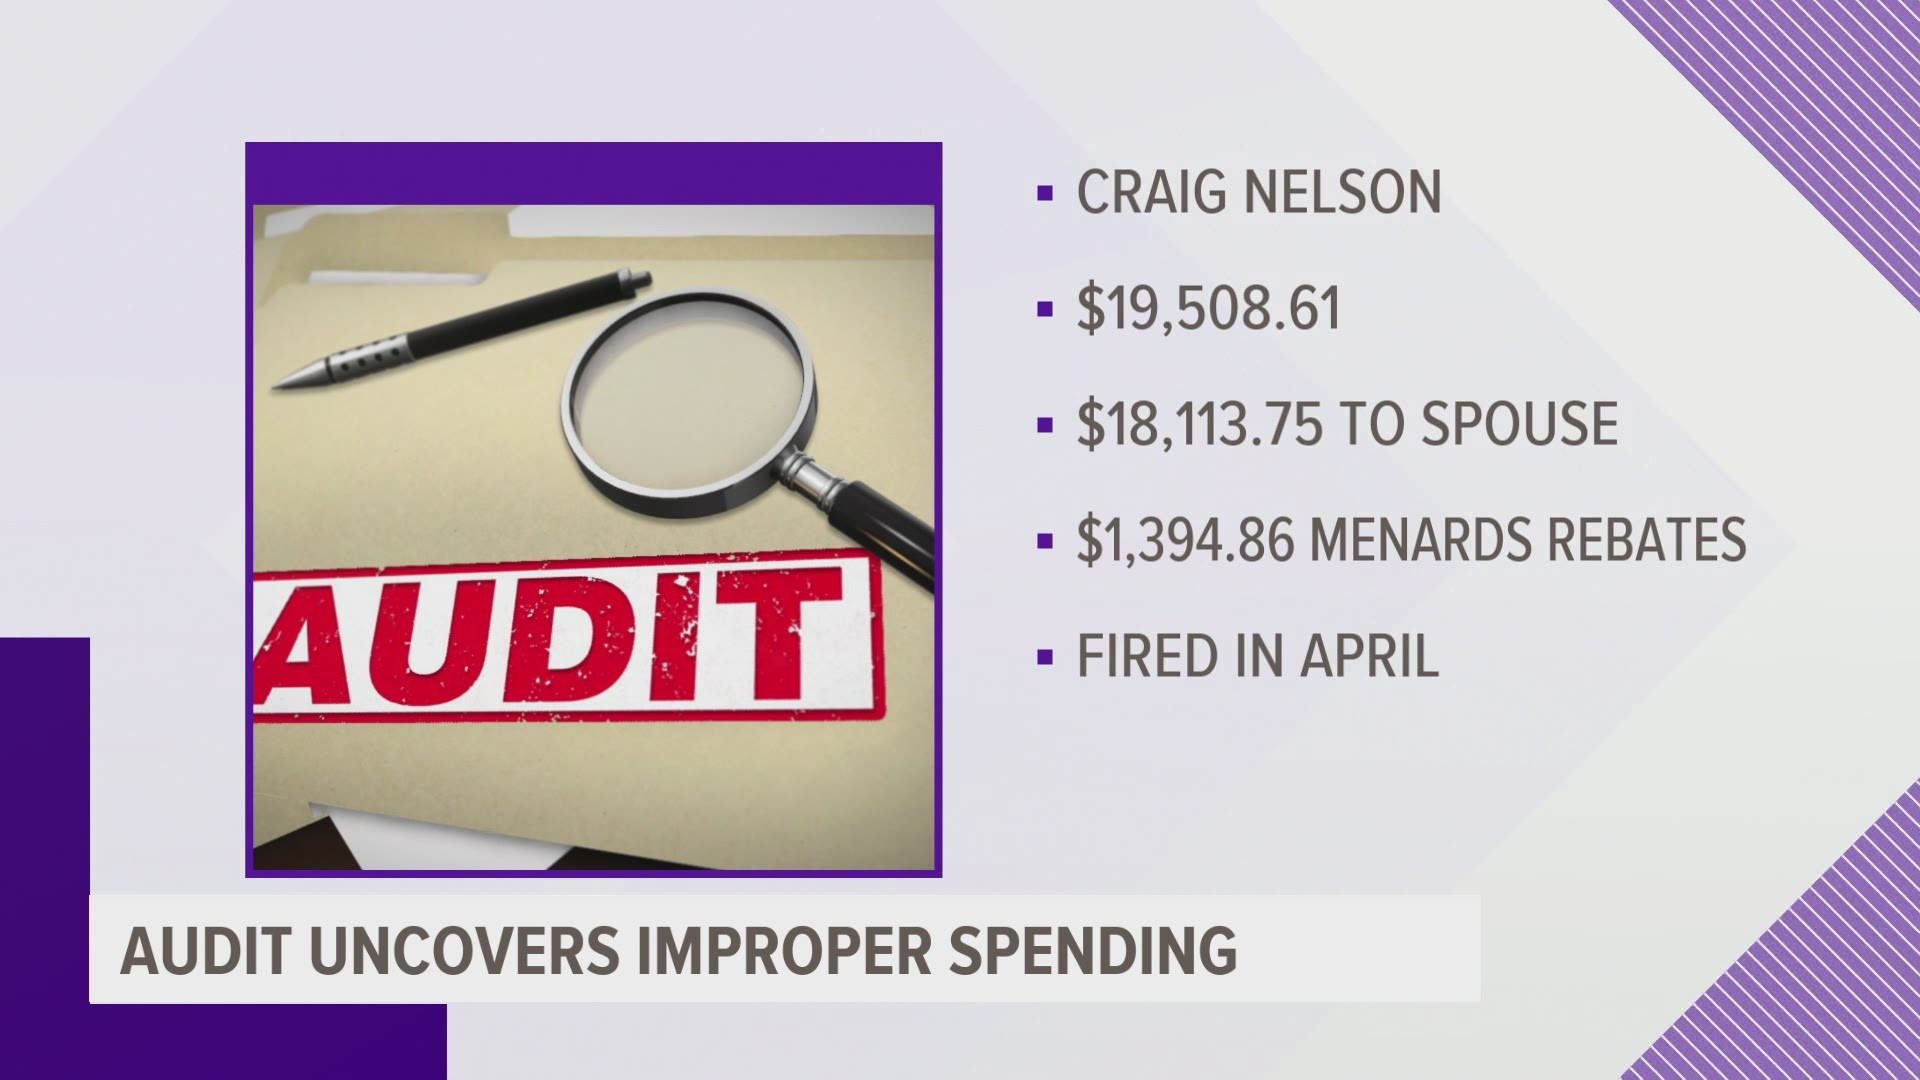 State Auditor Rob Sand's report says former DMPS horticulture teacher Craig Nelson spent $19,508.61 in improper disbursements.